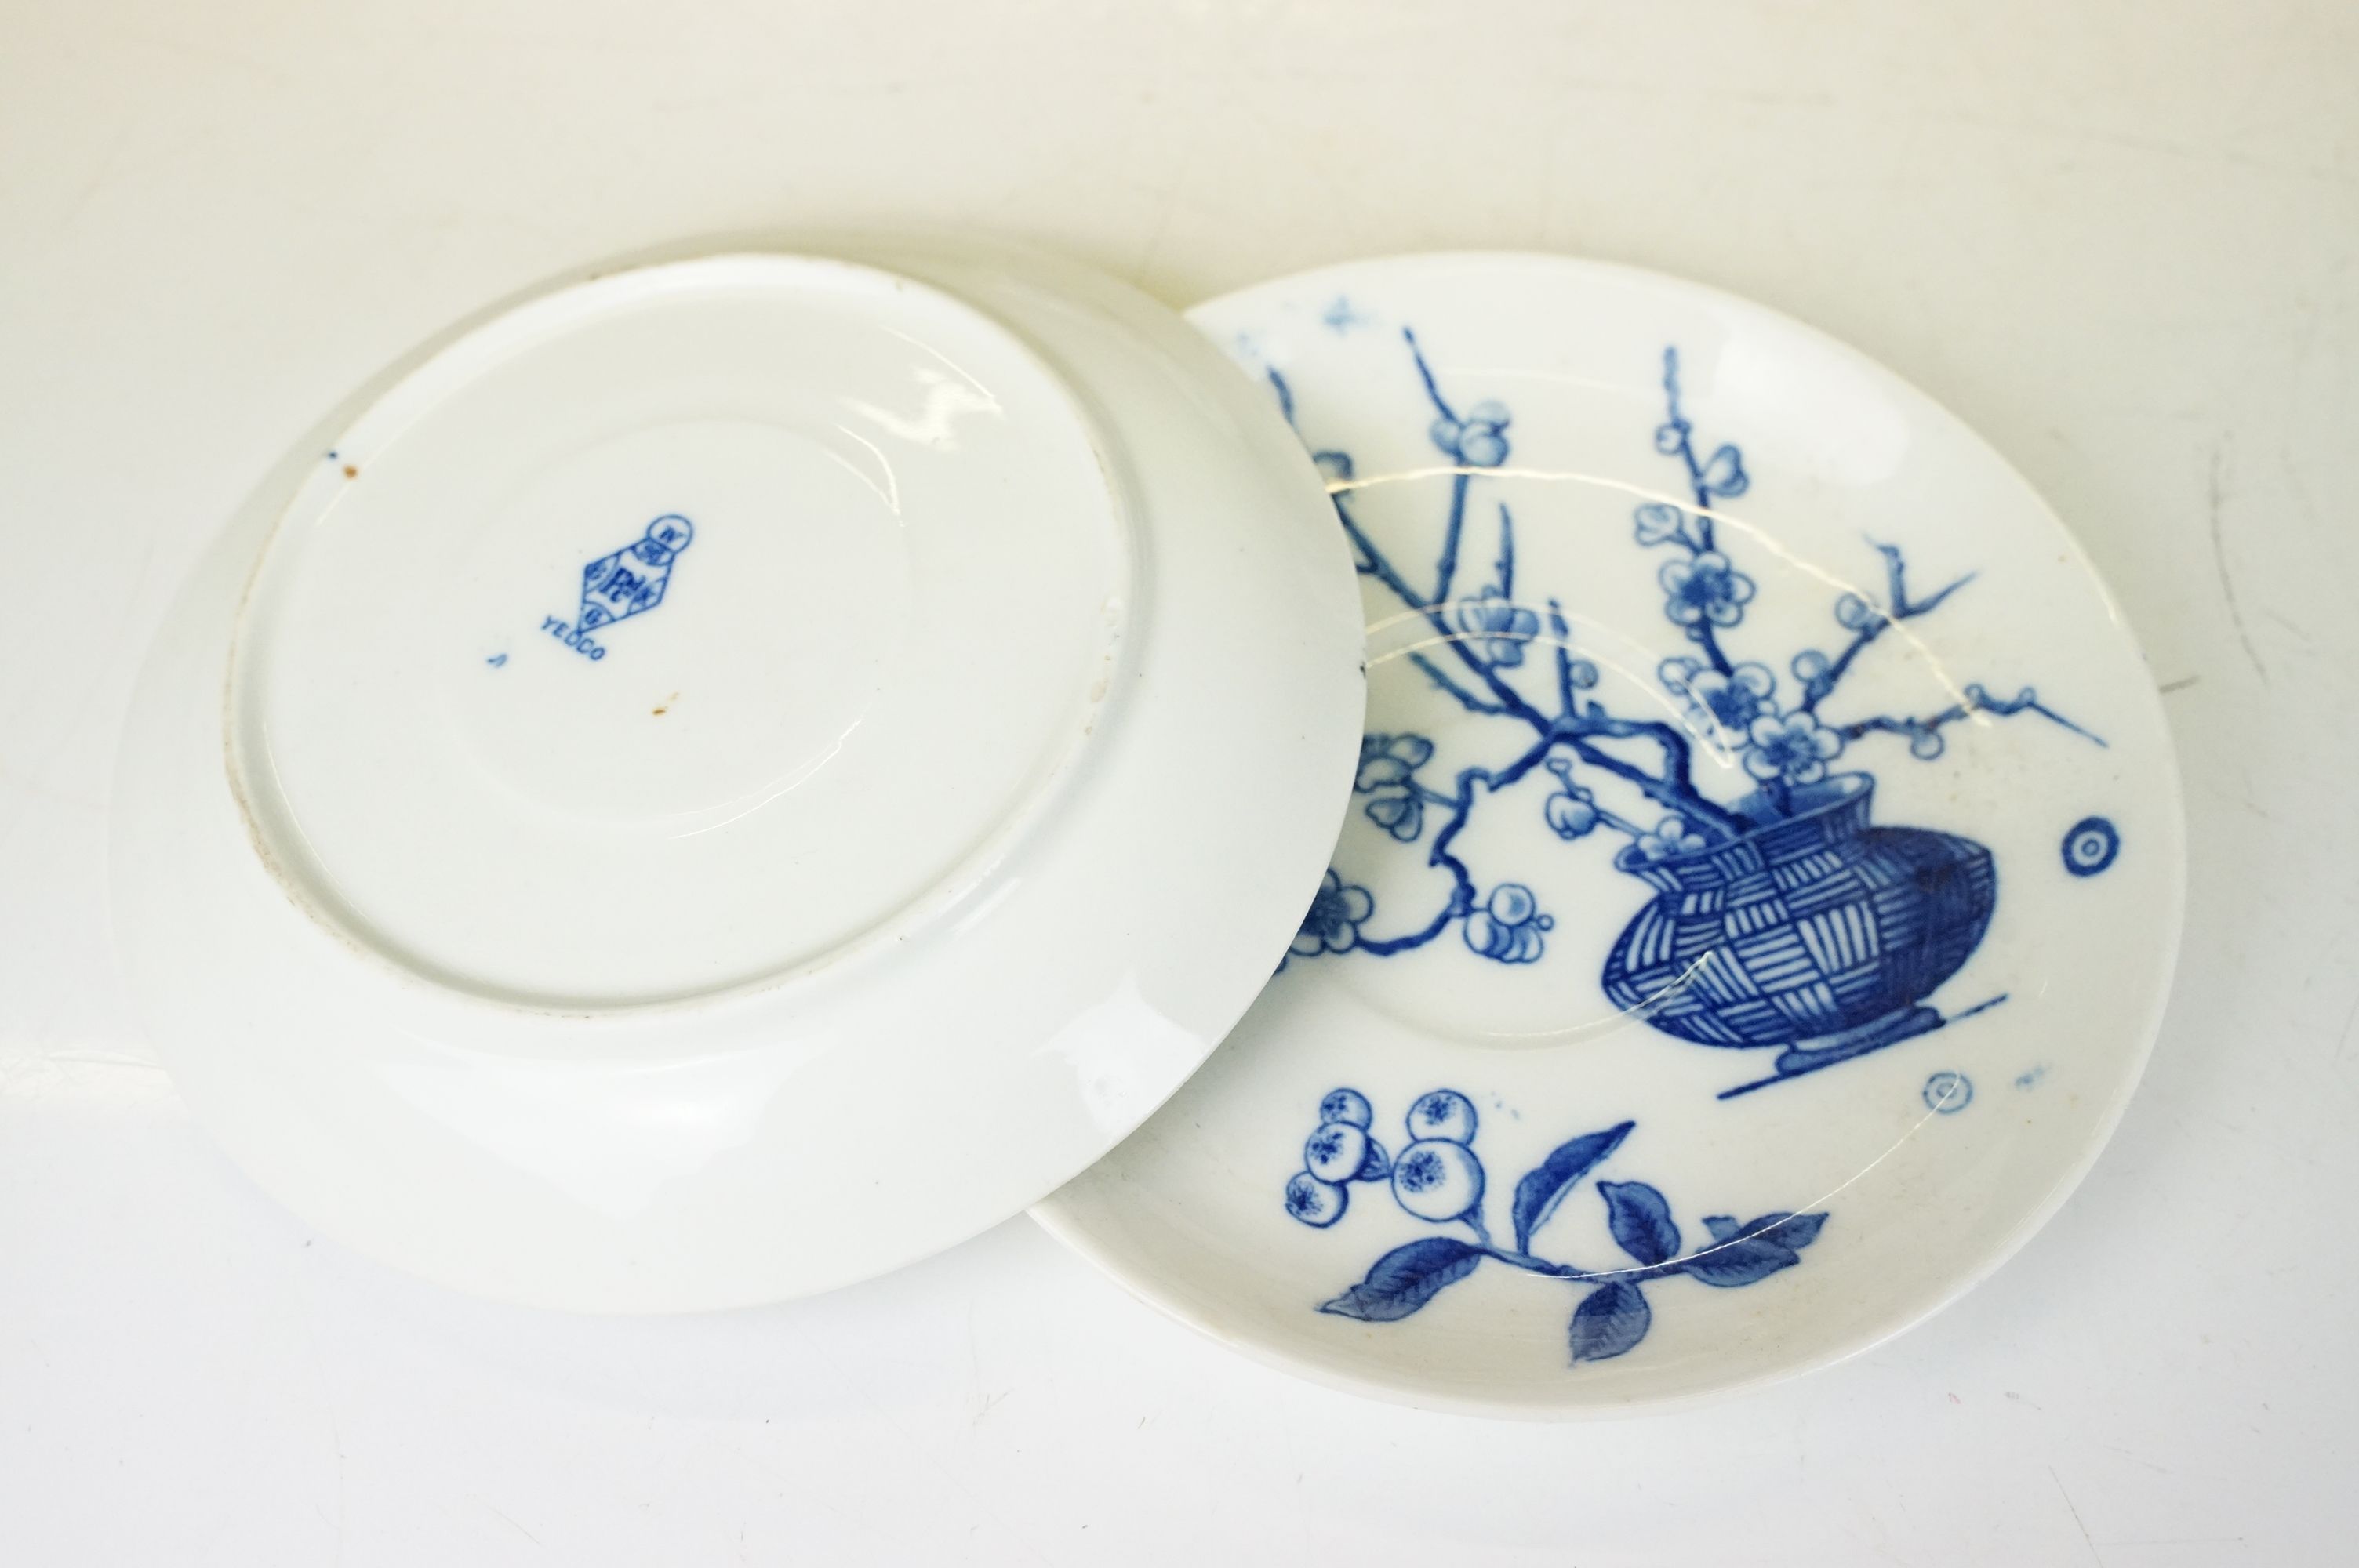 Collection of 19th century blue & white English porcelain, featuring early 19th C examples, to - Image 5 of 13